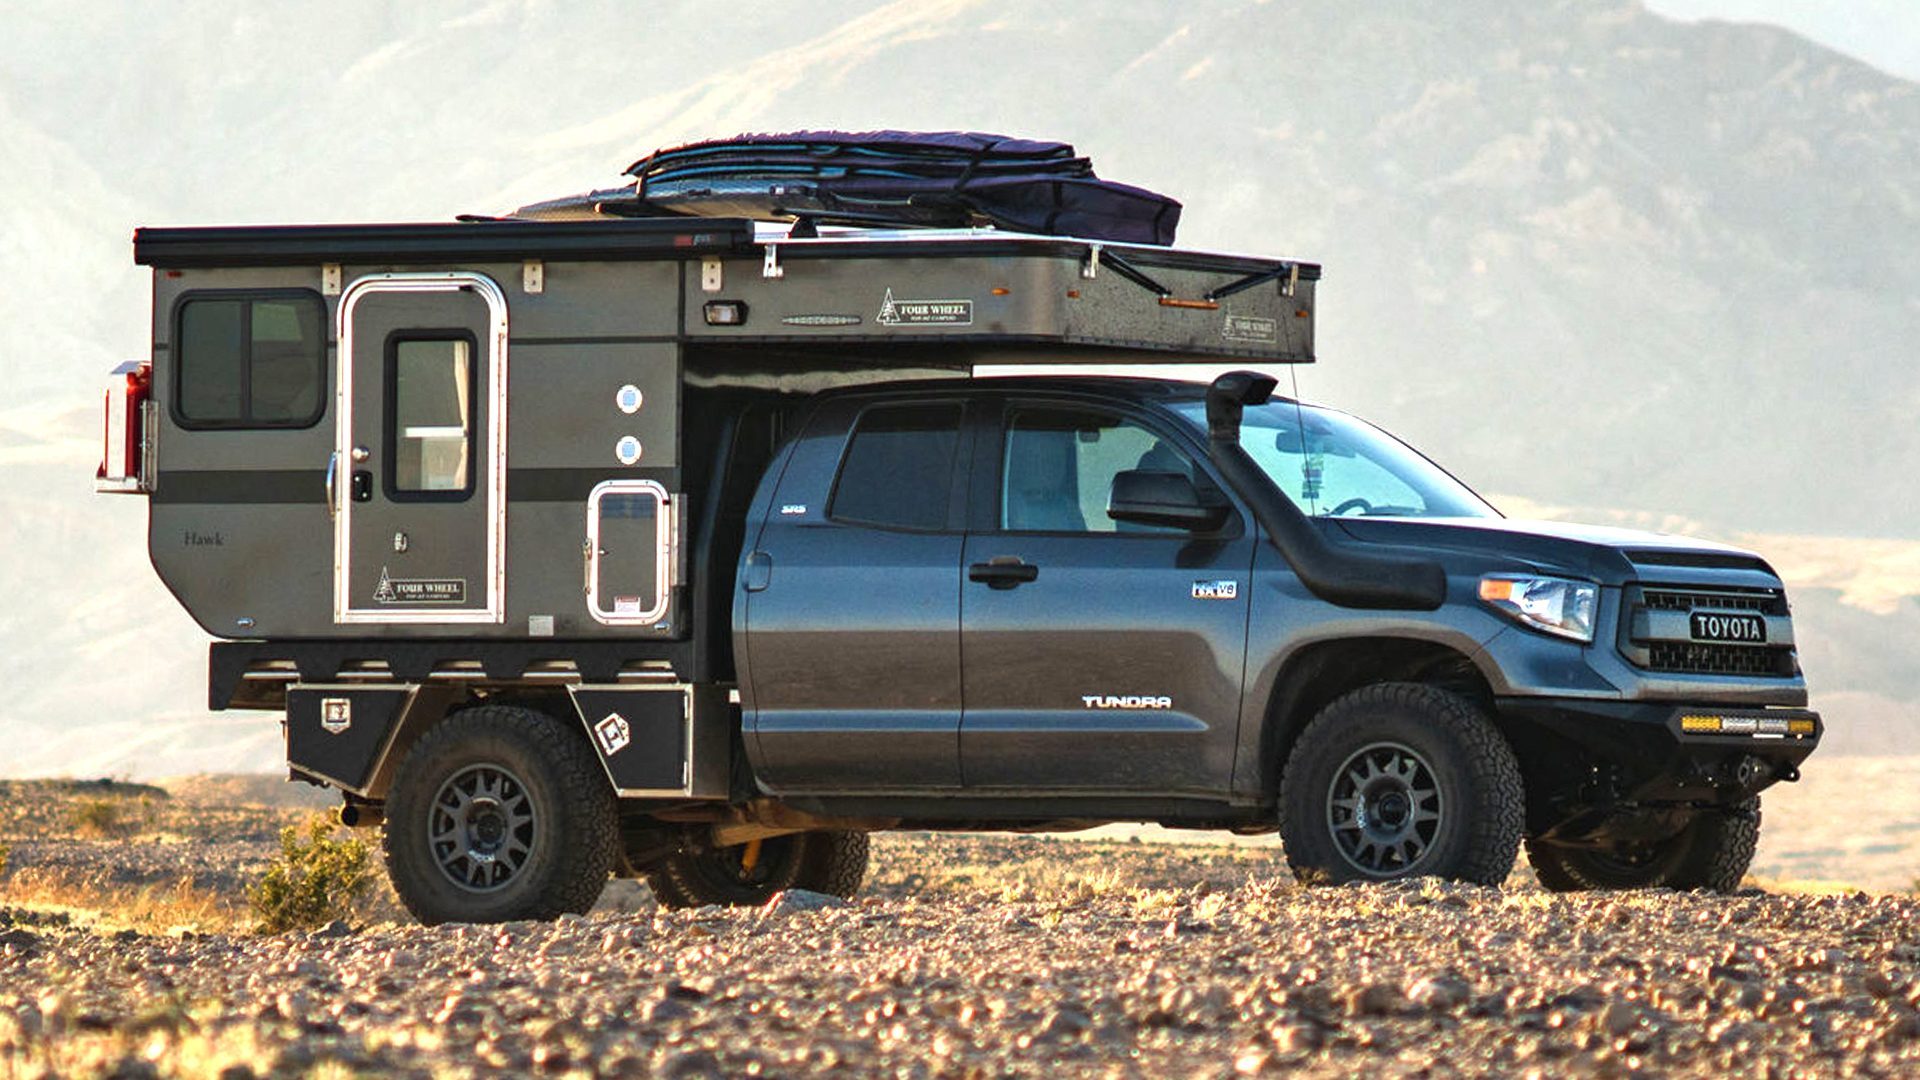 Toyota Tundra Camper With Pop Up Top Is The Ultimate Off Road Rig!